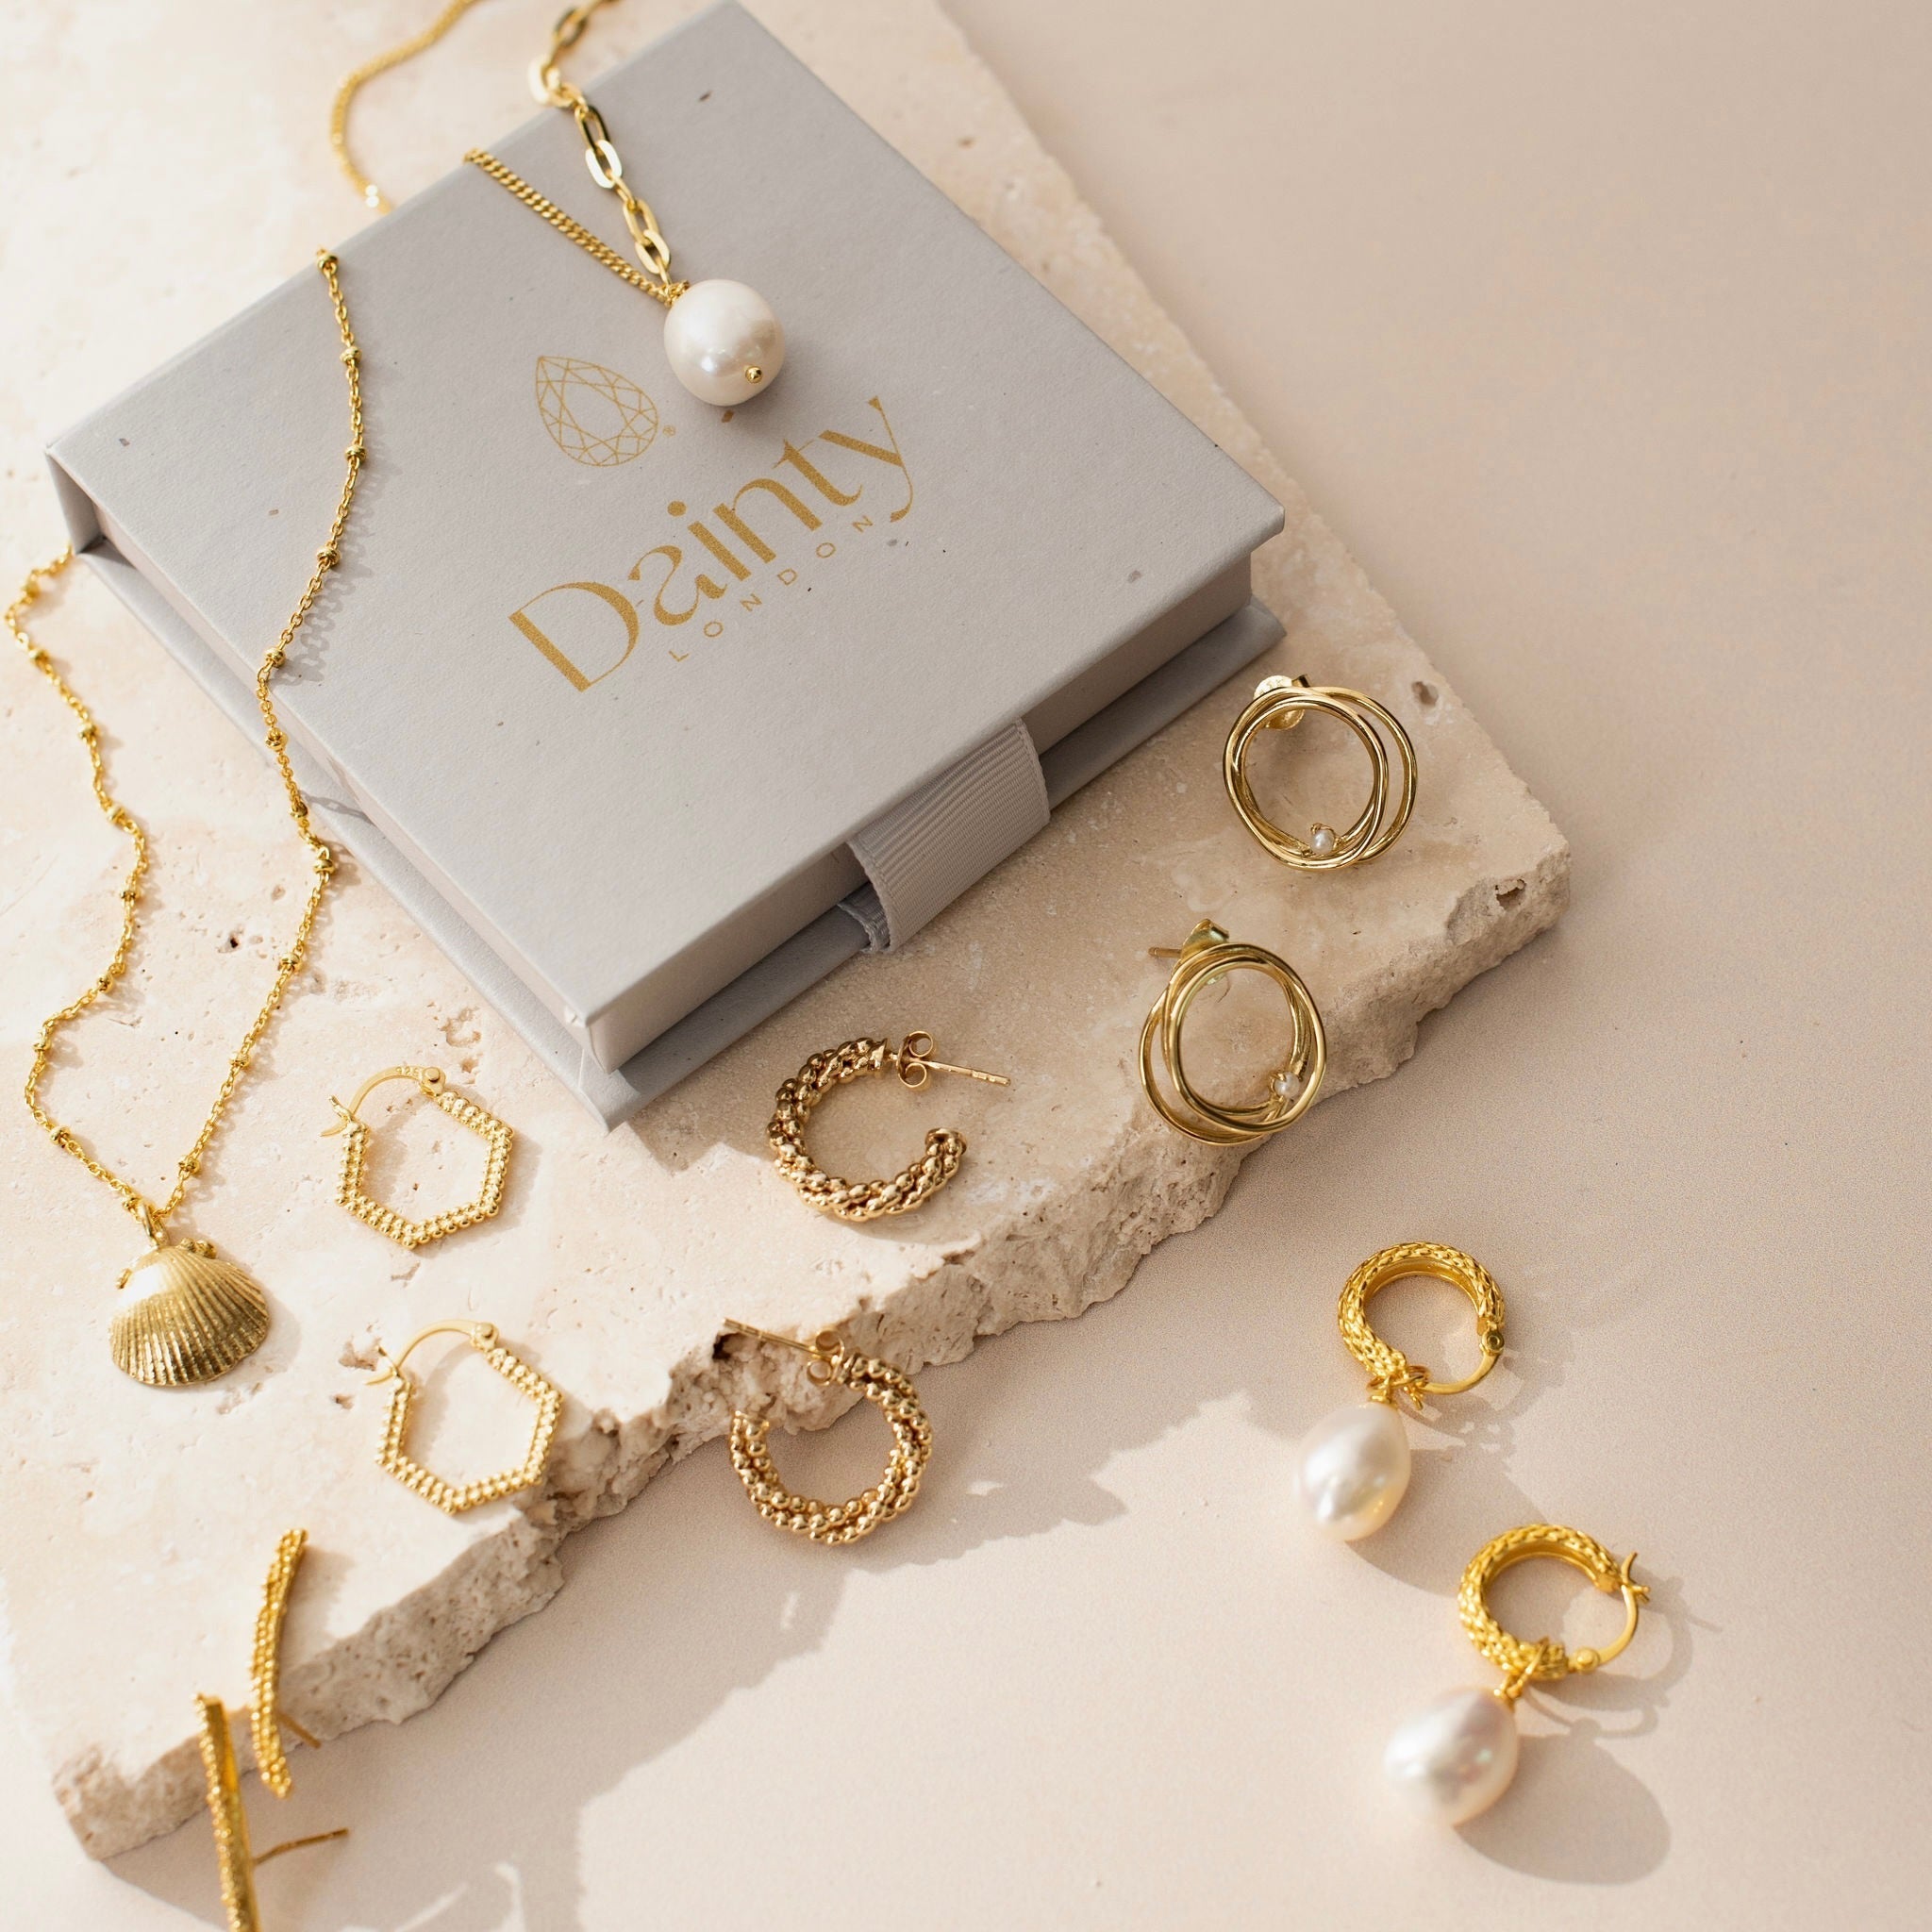 Intriguing Treasures GOLD Subscription Box- pay in full - Dainty London